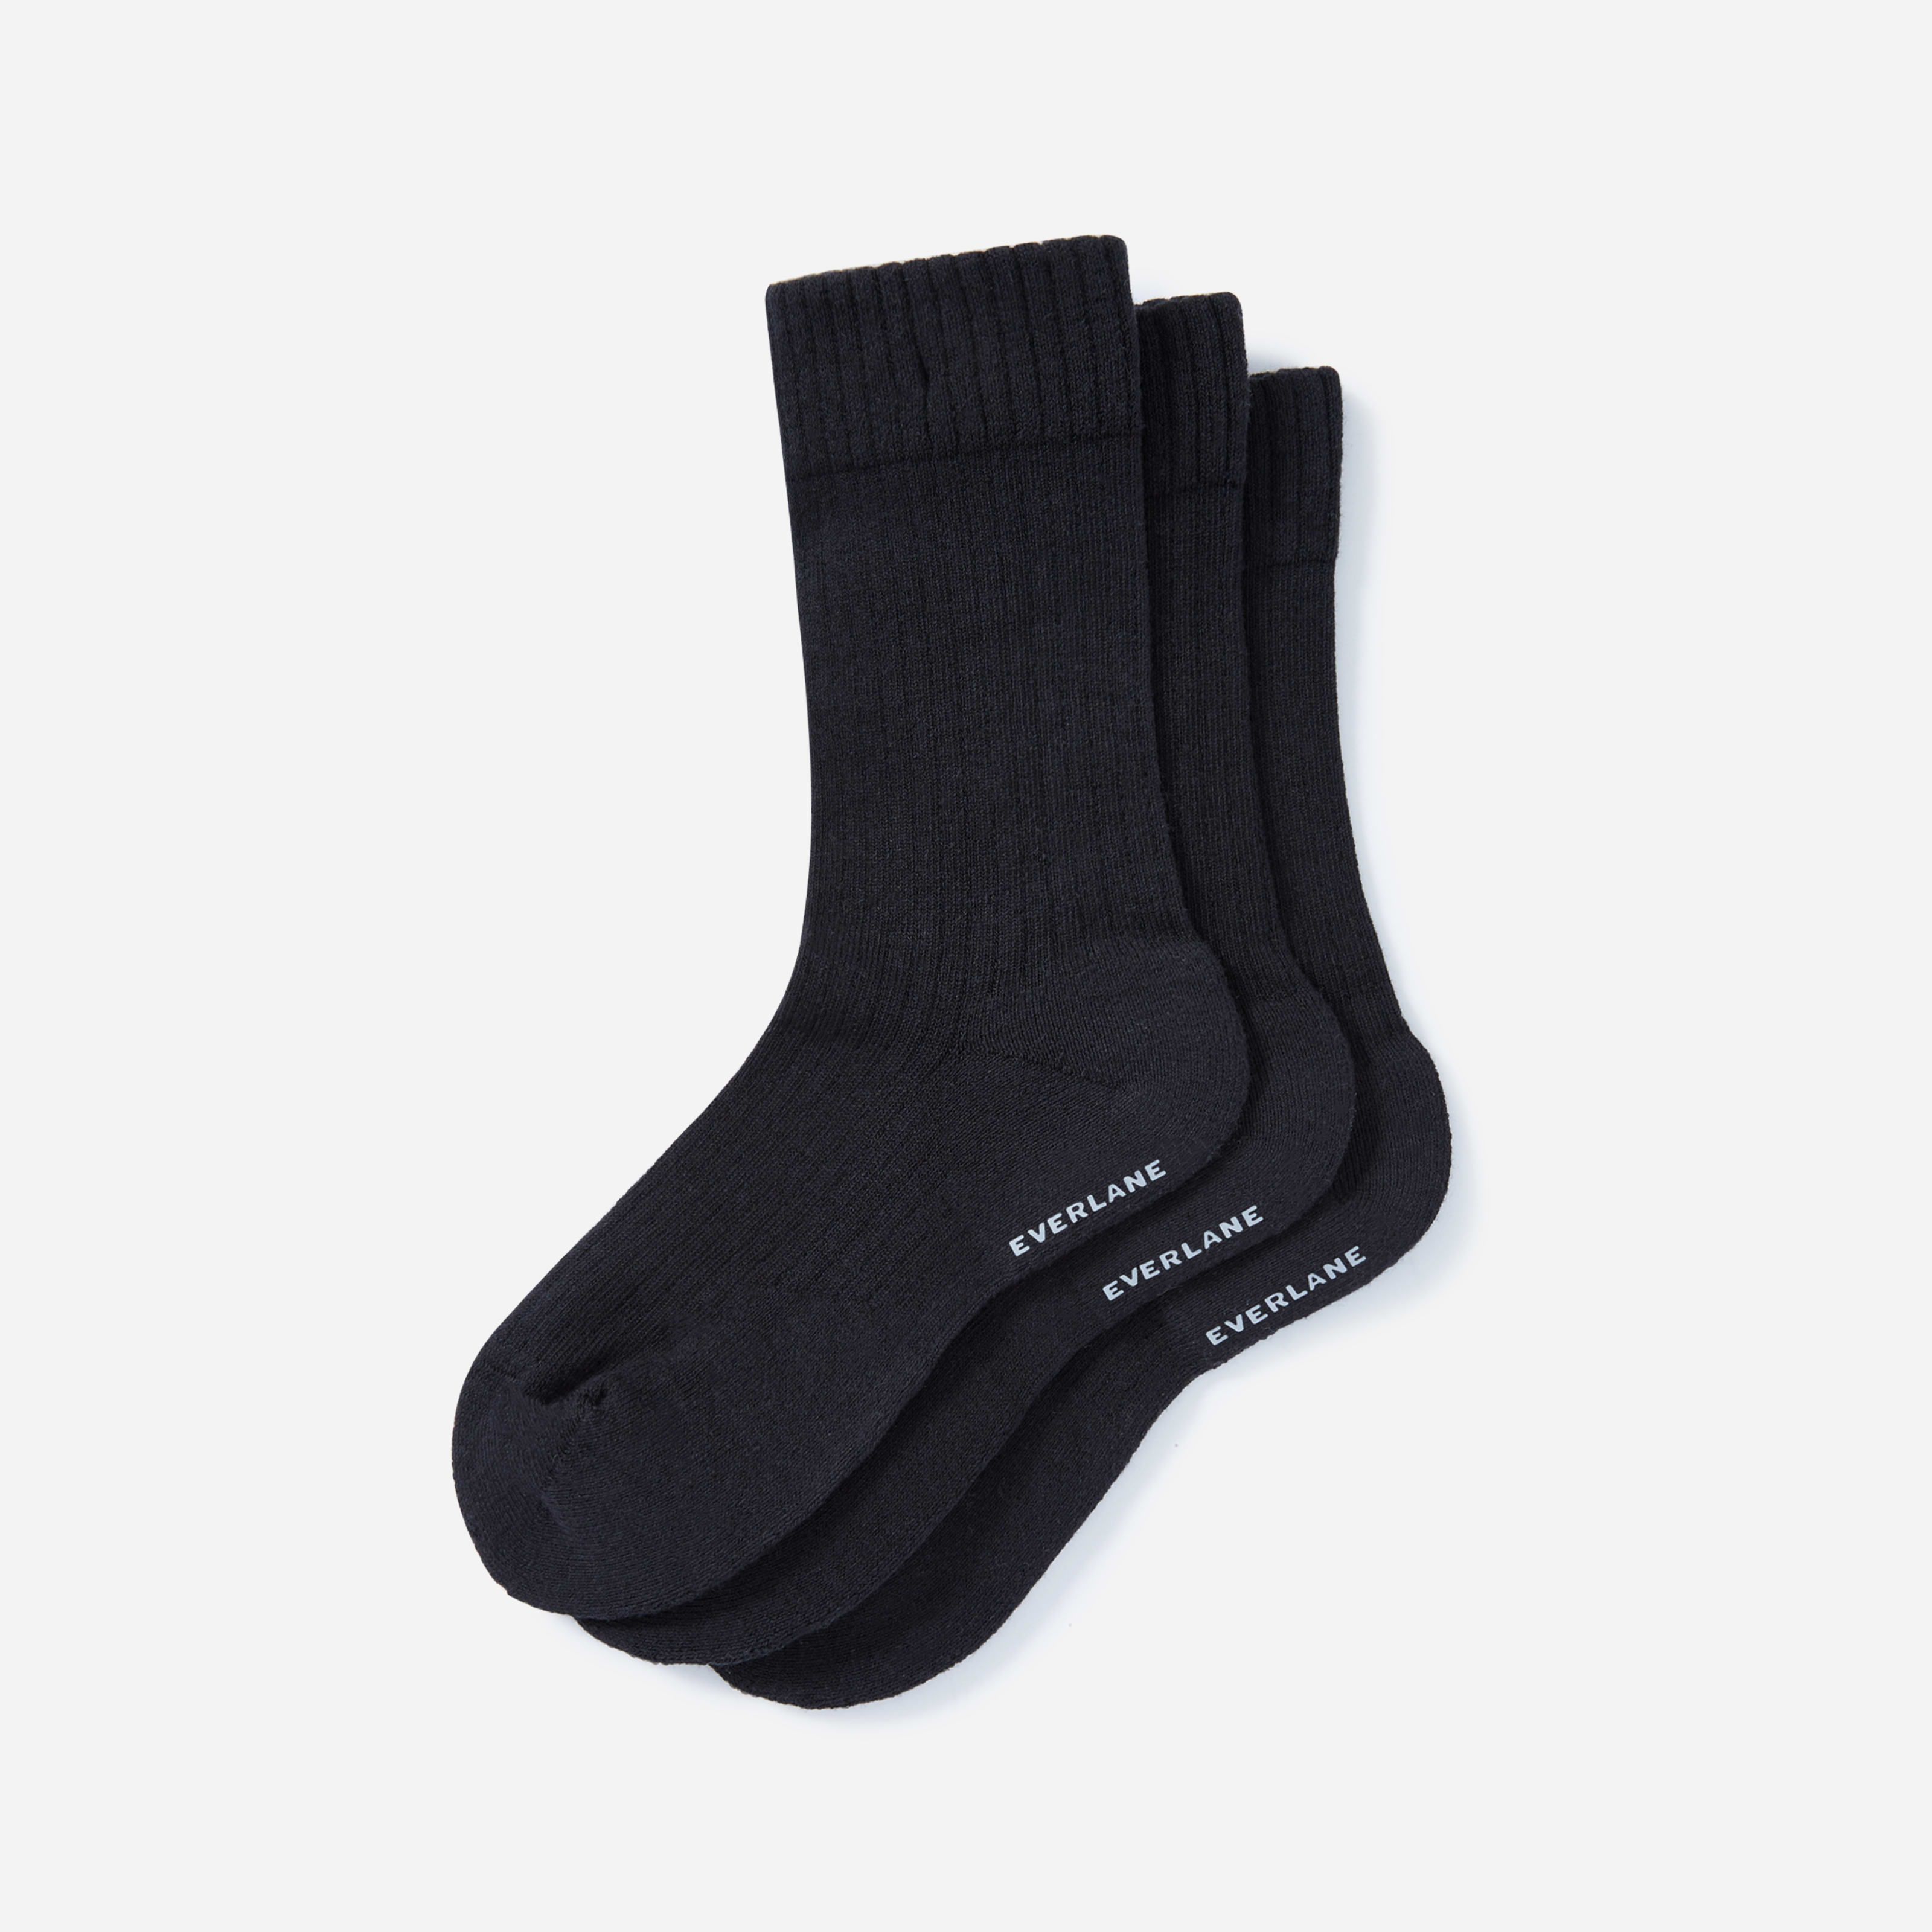 Organic Cotton Ribbed Crew Sock 3-Pack by Everlane in Black, Size M | Everlane